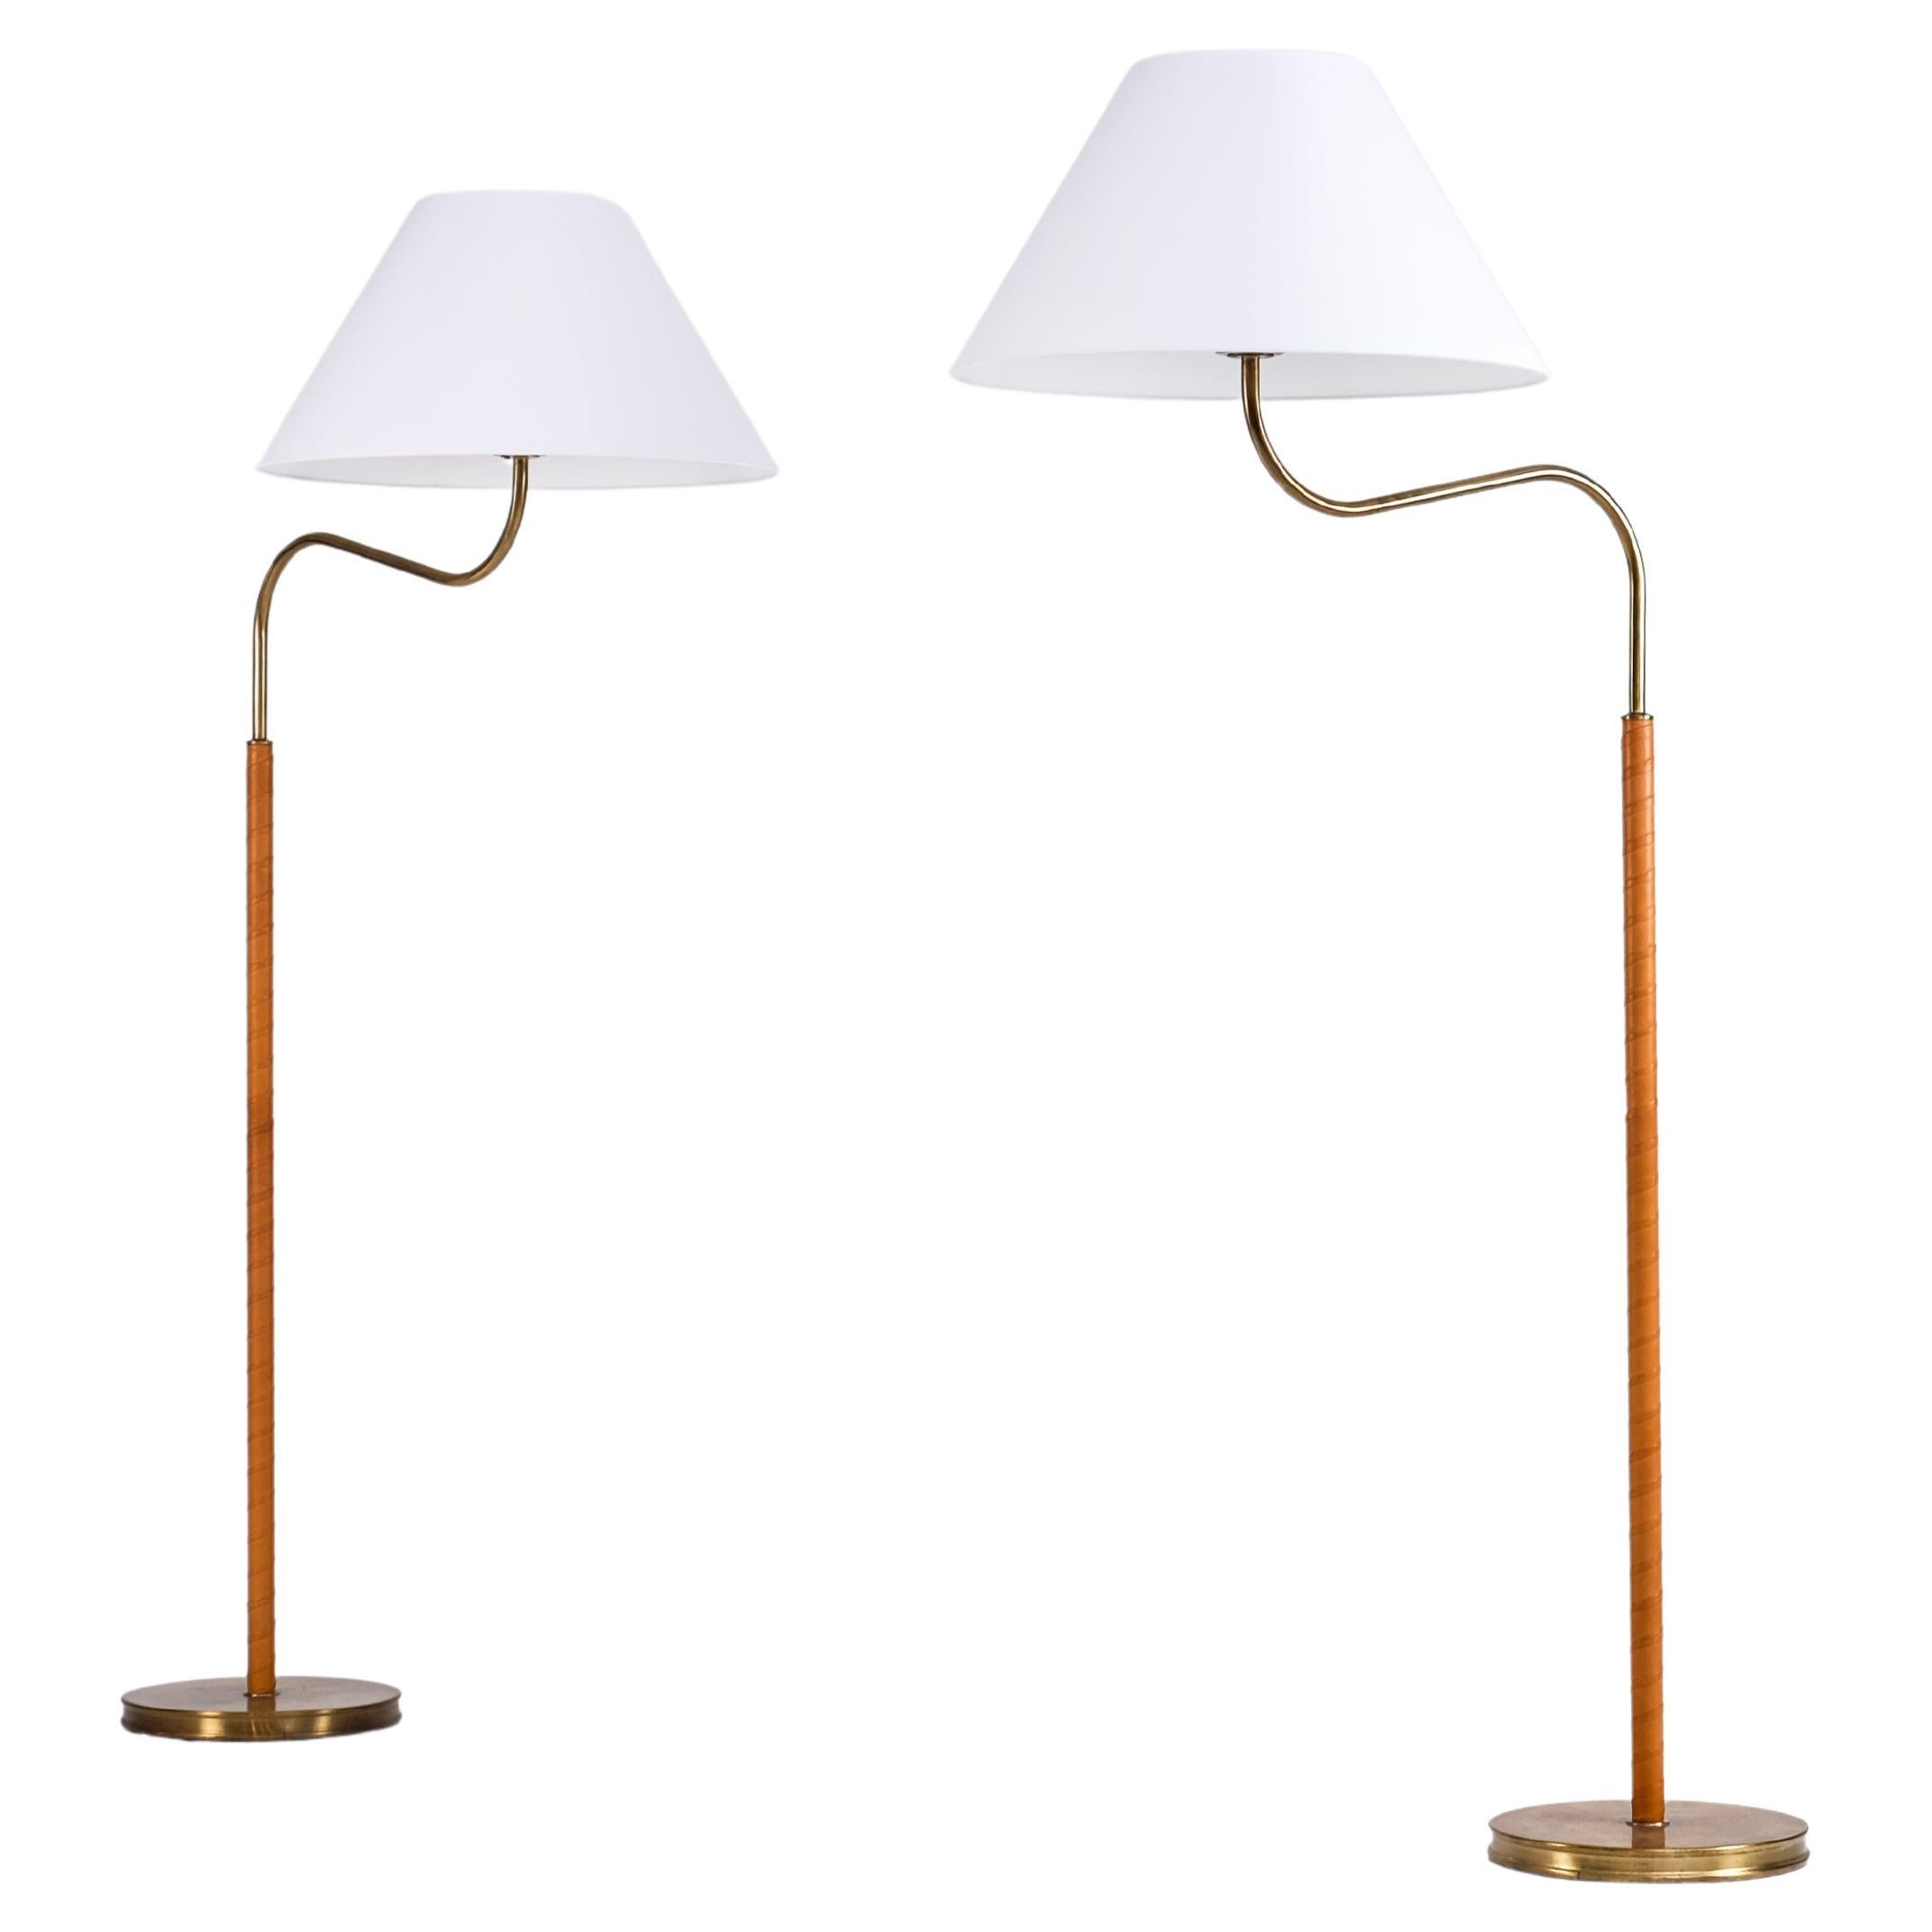 Pair of 'Large Camel' Floor Lamps by Josef Frank, Sweden, 1960s For Sale